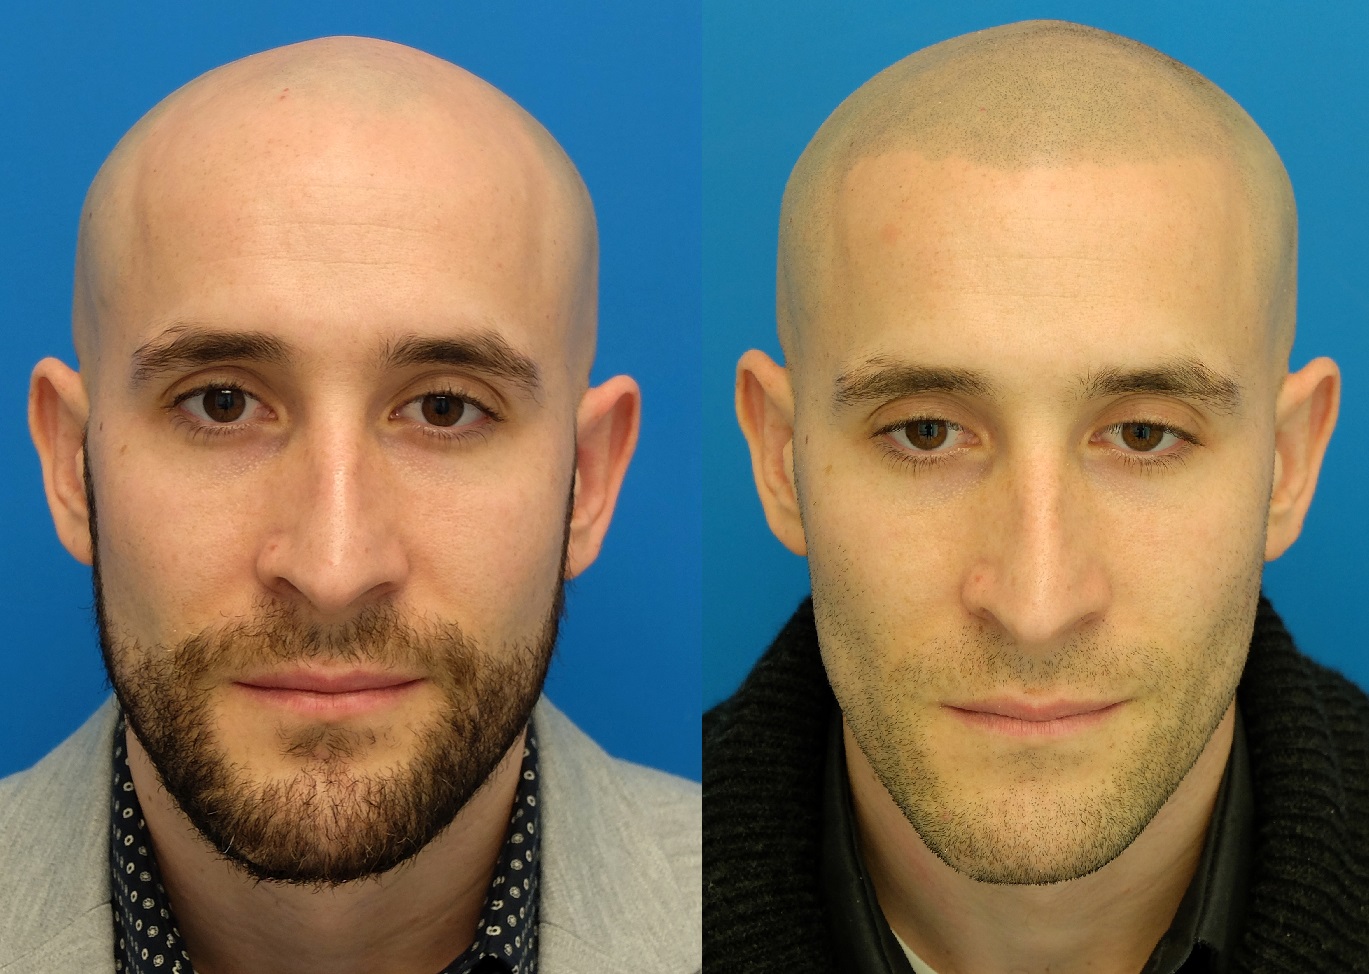 H&W/NuYuInk SMP - Scalp Micropigmentation (SMP) - Hair Restoration Network  - Community For and By Hair Loss Patients